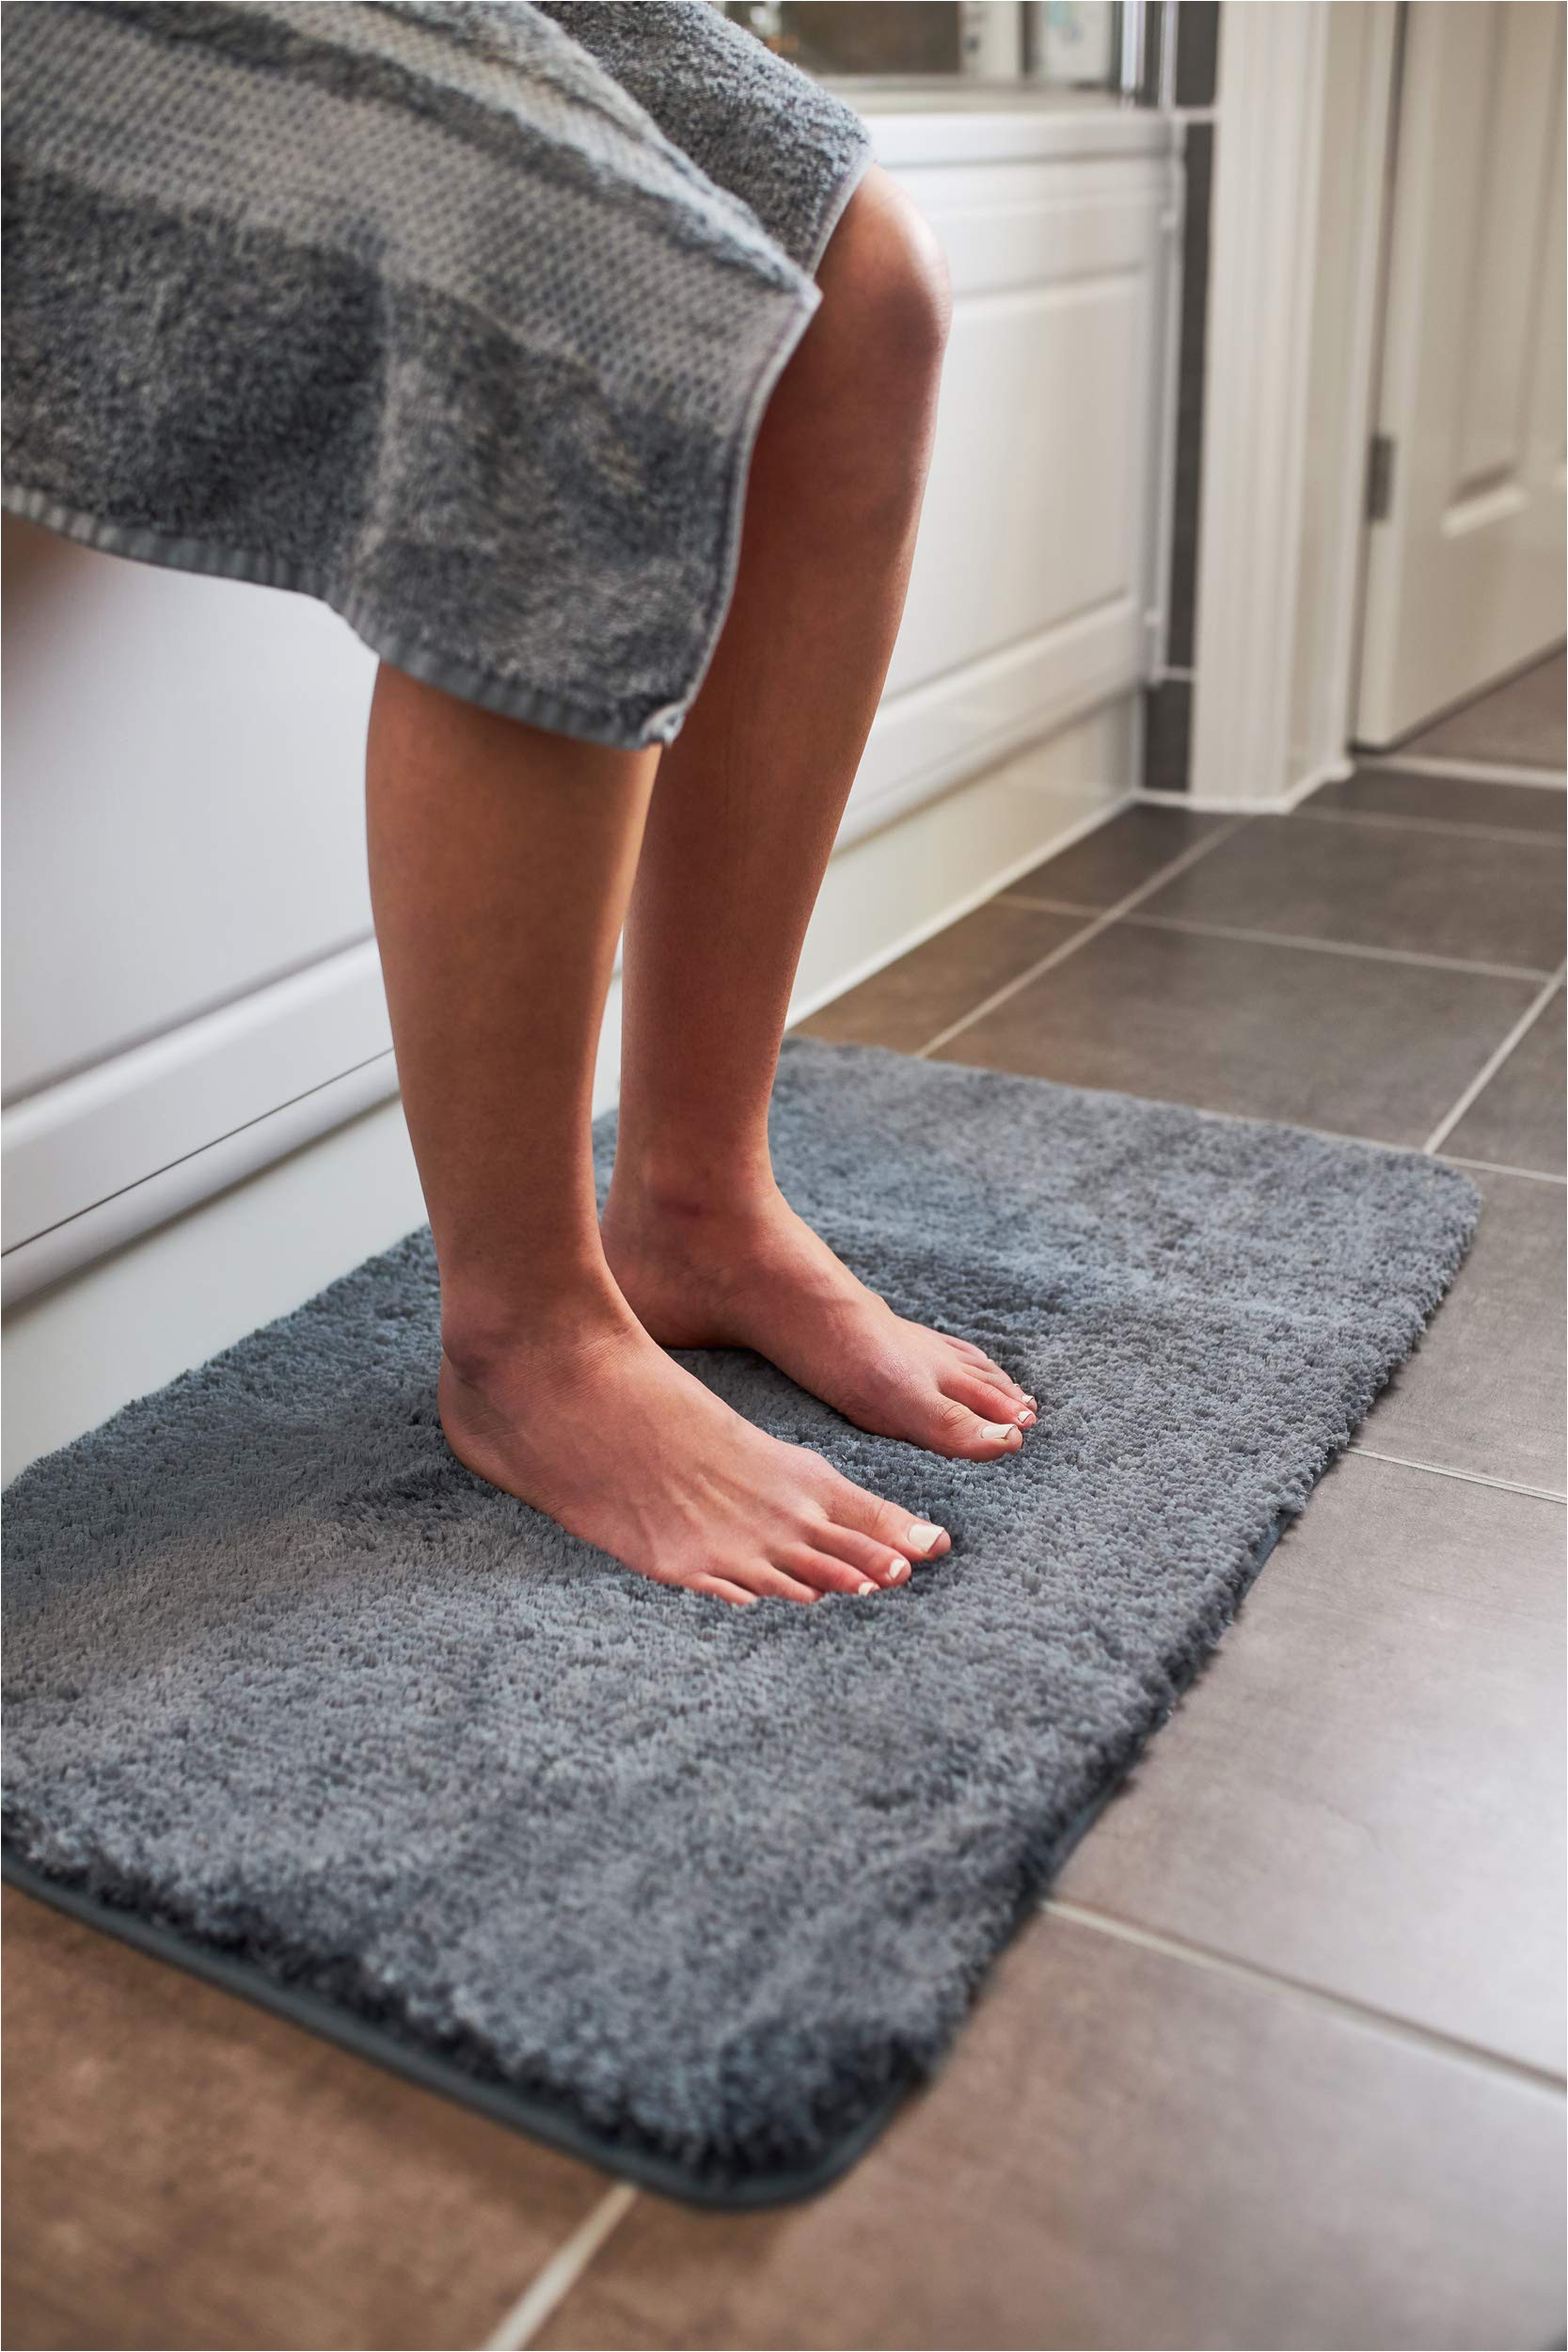 Best Quality Bathroom Rugs Luxury Grey Bath Mat Microfiber Non Slip Bath Rug with Super soft Absorbent Dry Fast Design for Bath and Shower